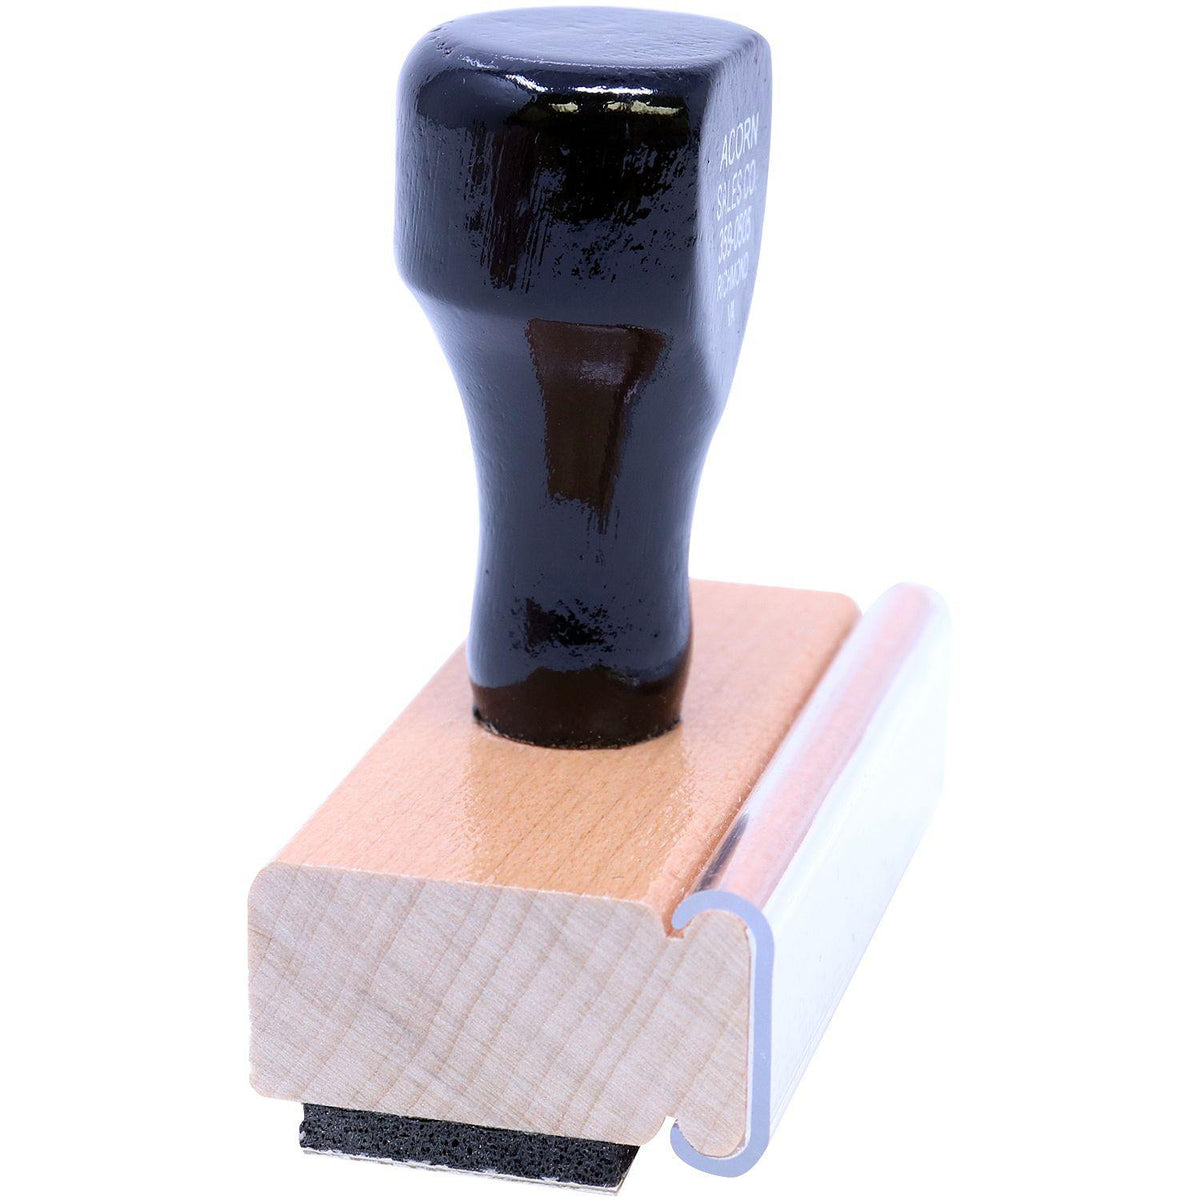 Side View of Large Outline Paid Rubber Stamp at an Angle